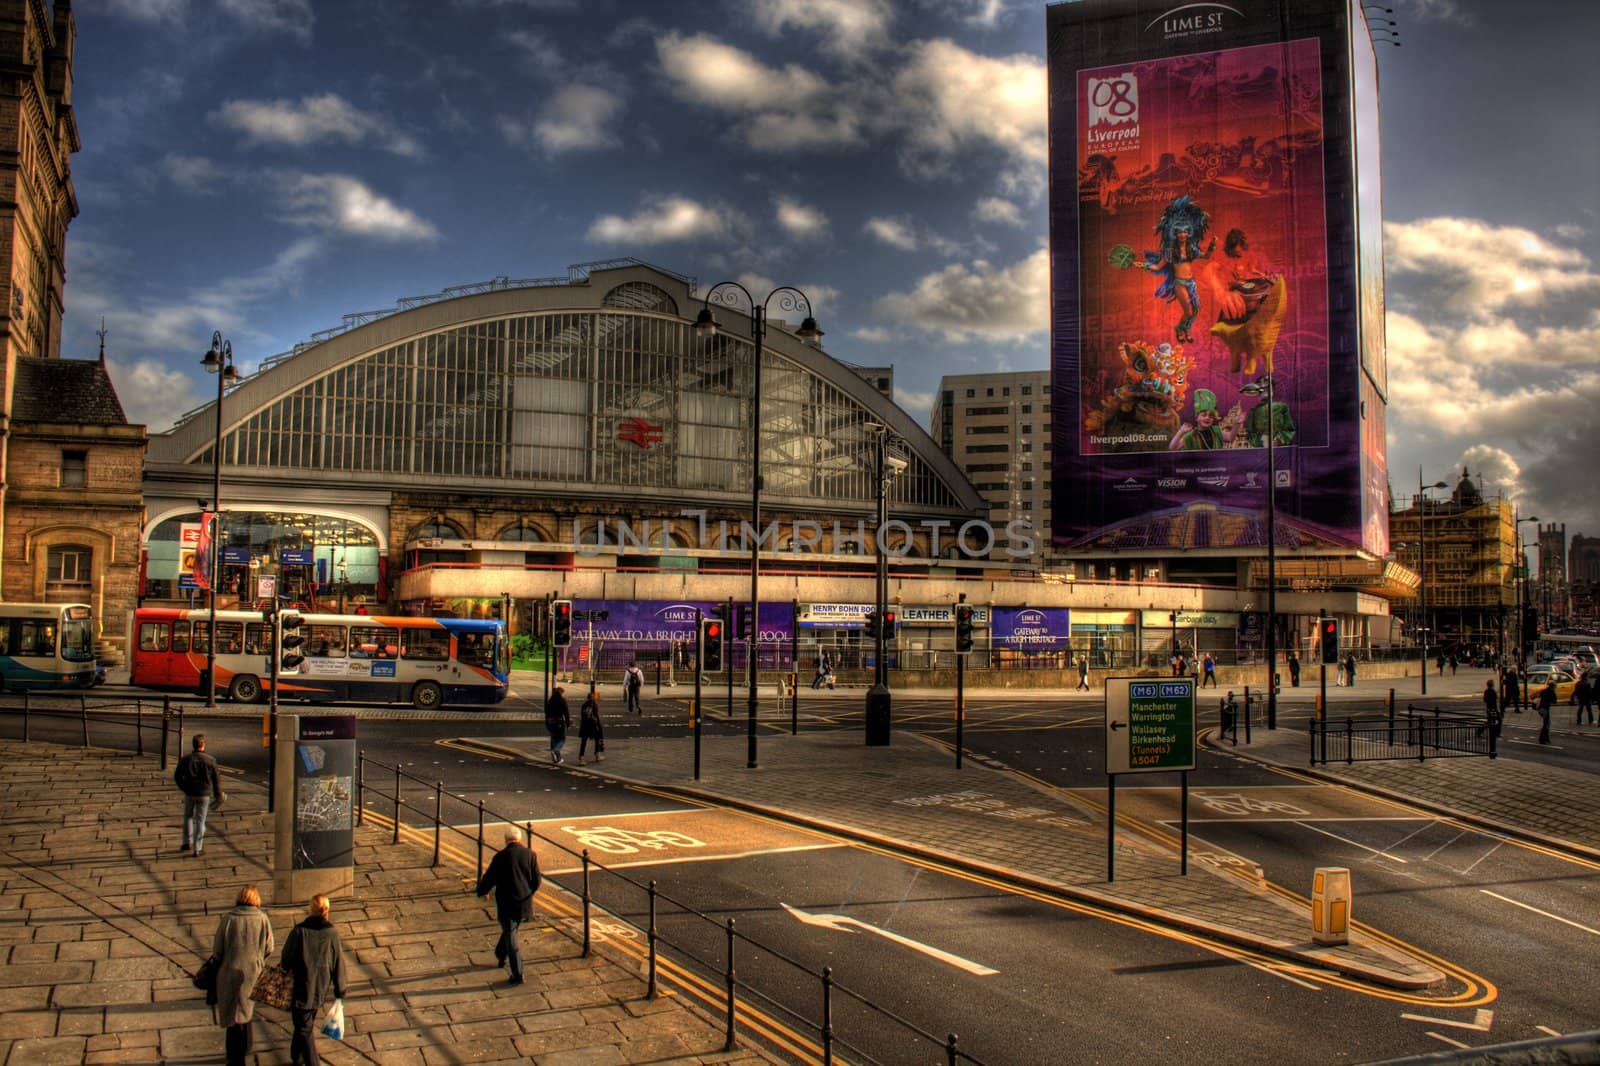 HDR image of Lime Street Station, Liverpool, UK